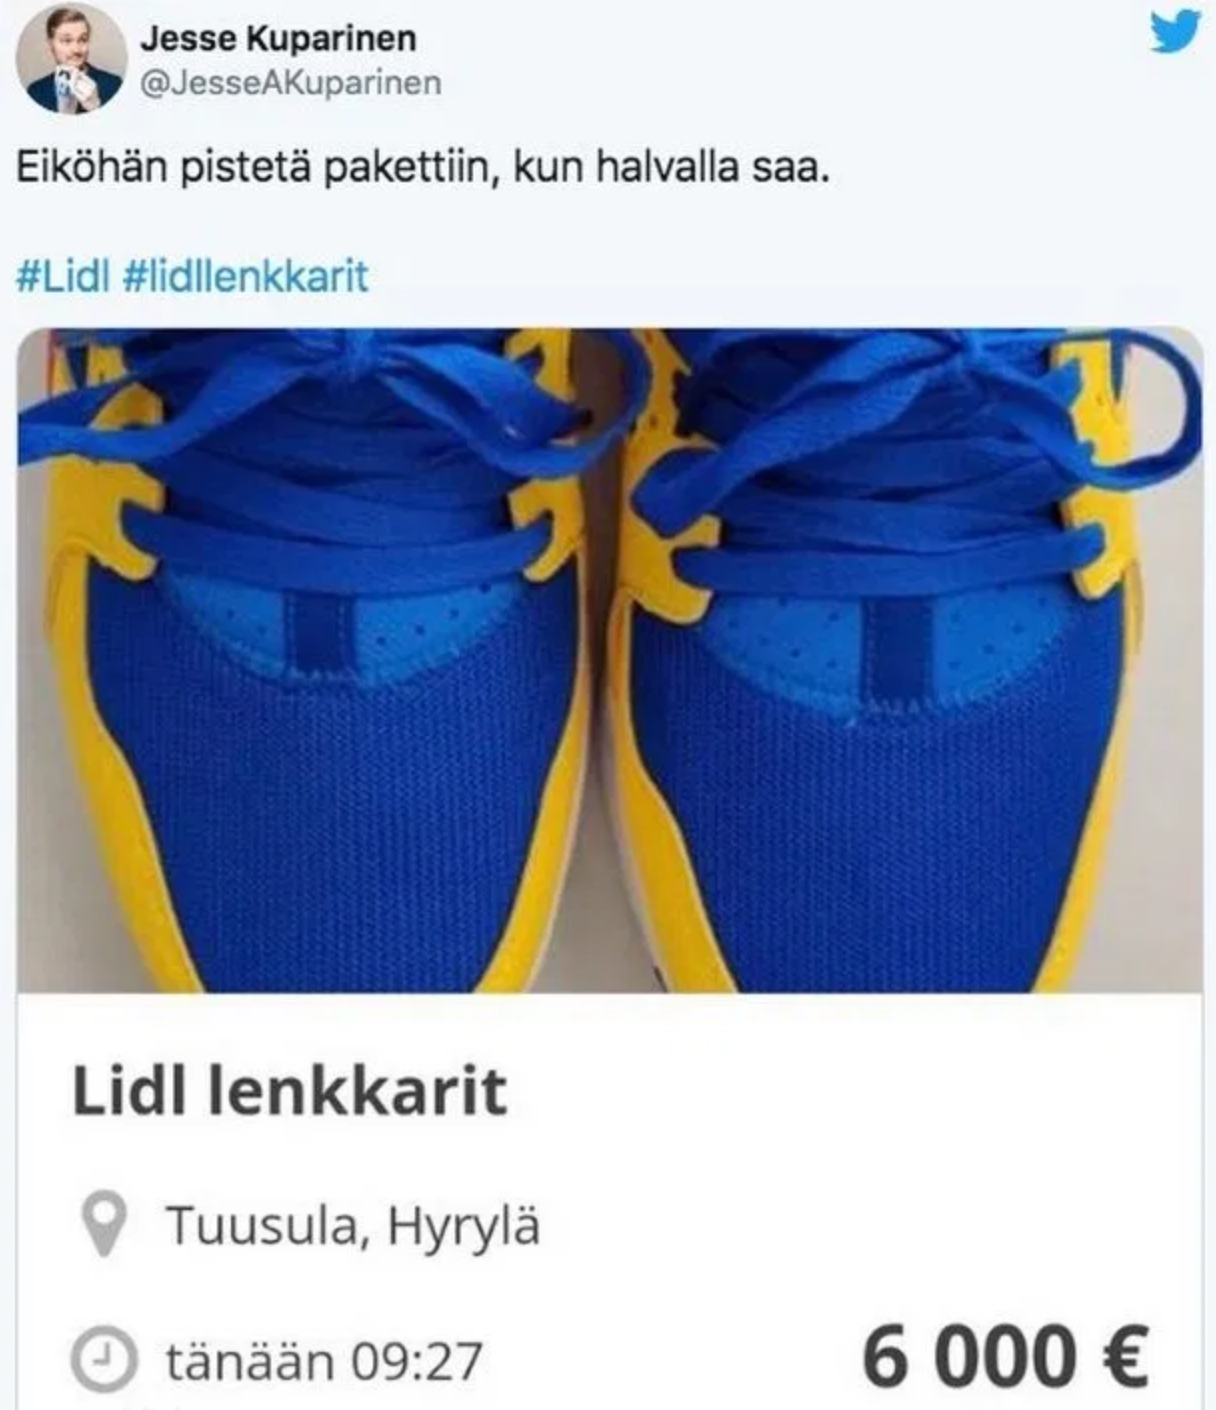 LIDL Limited Edition 2020 • Sneakers